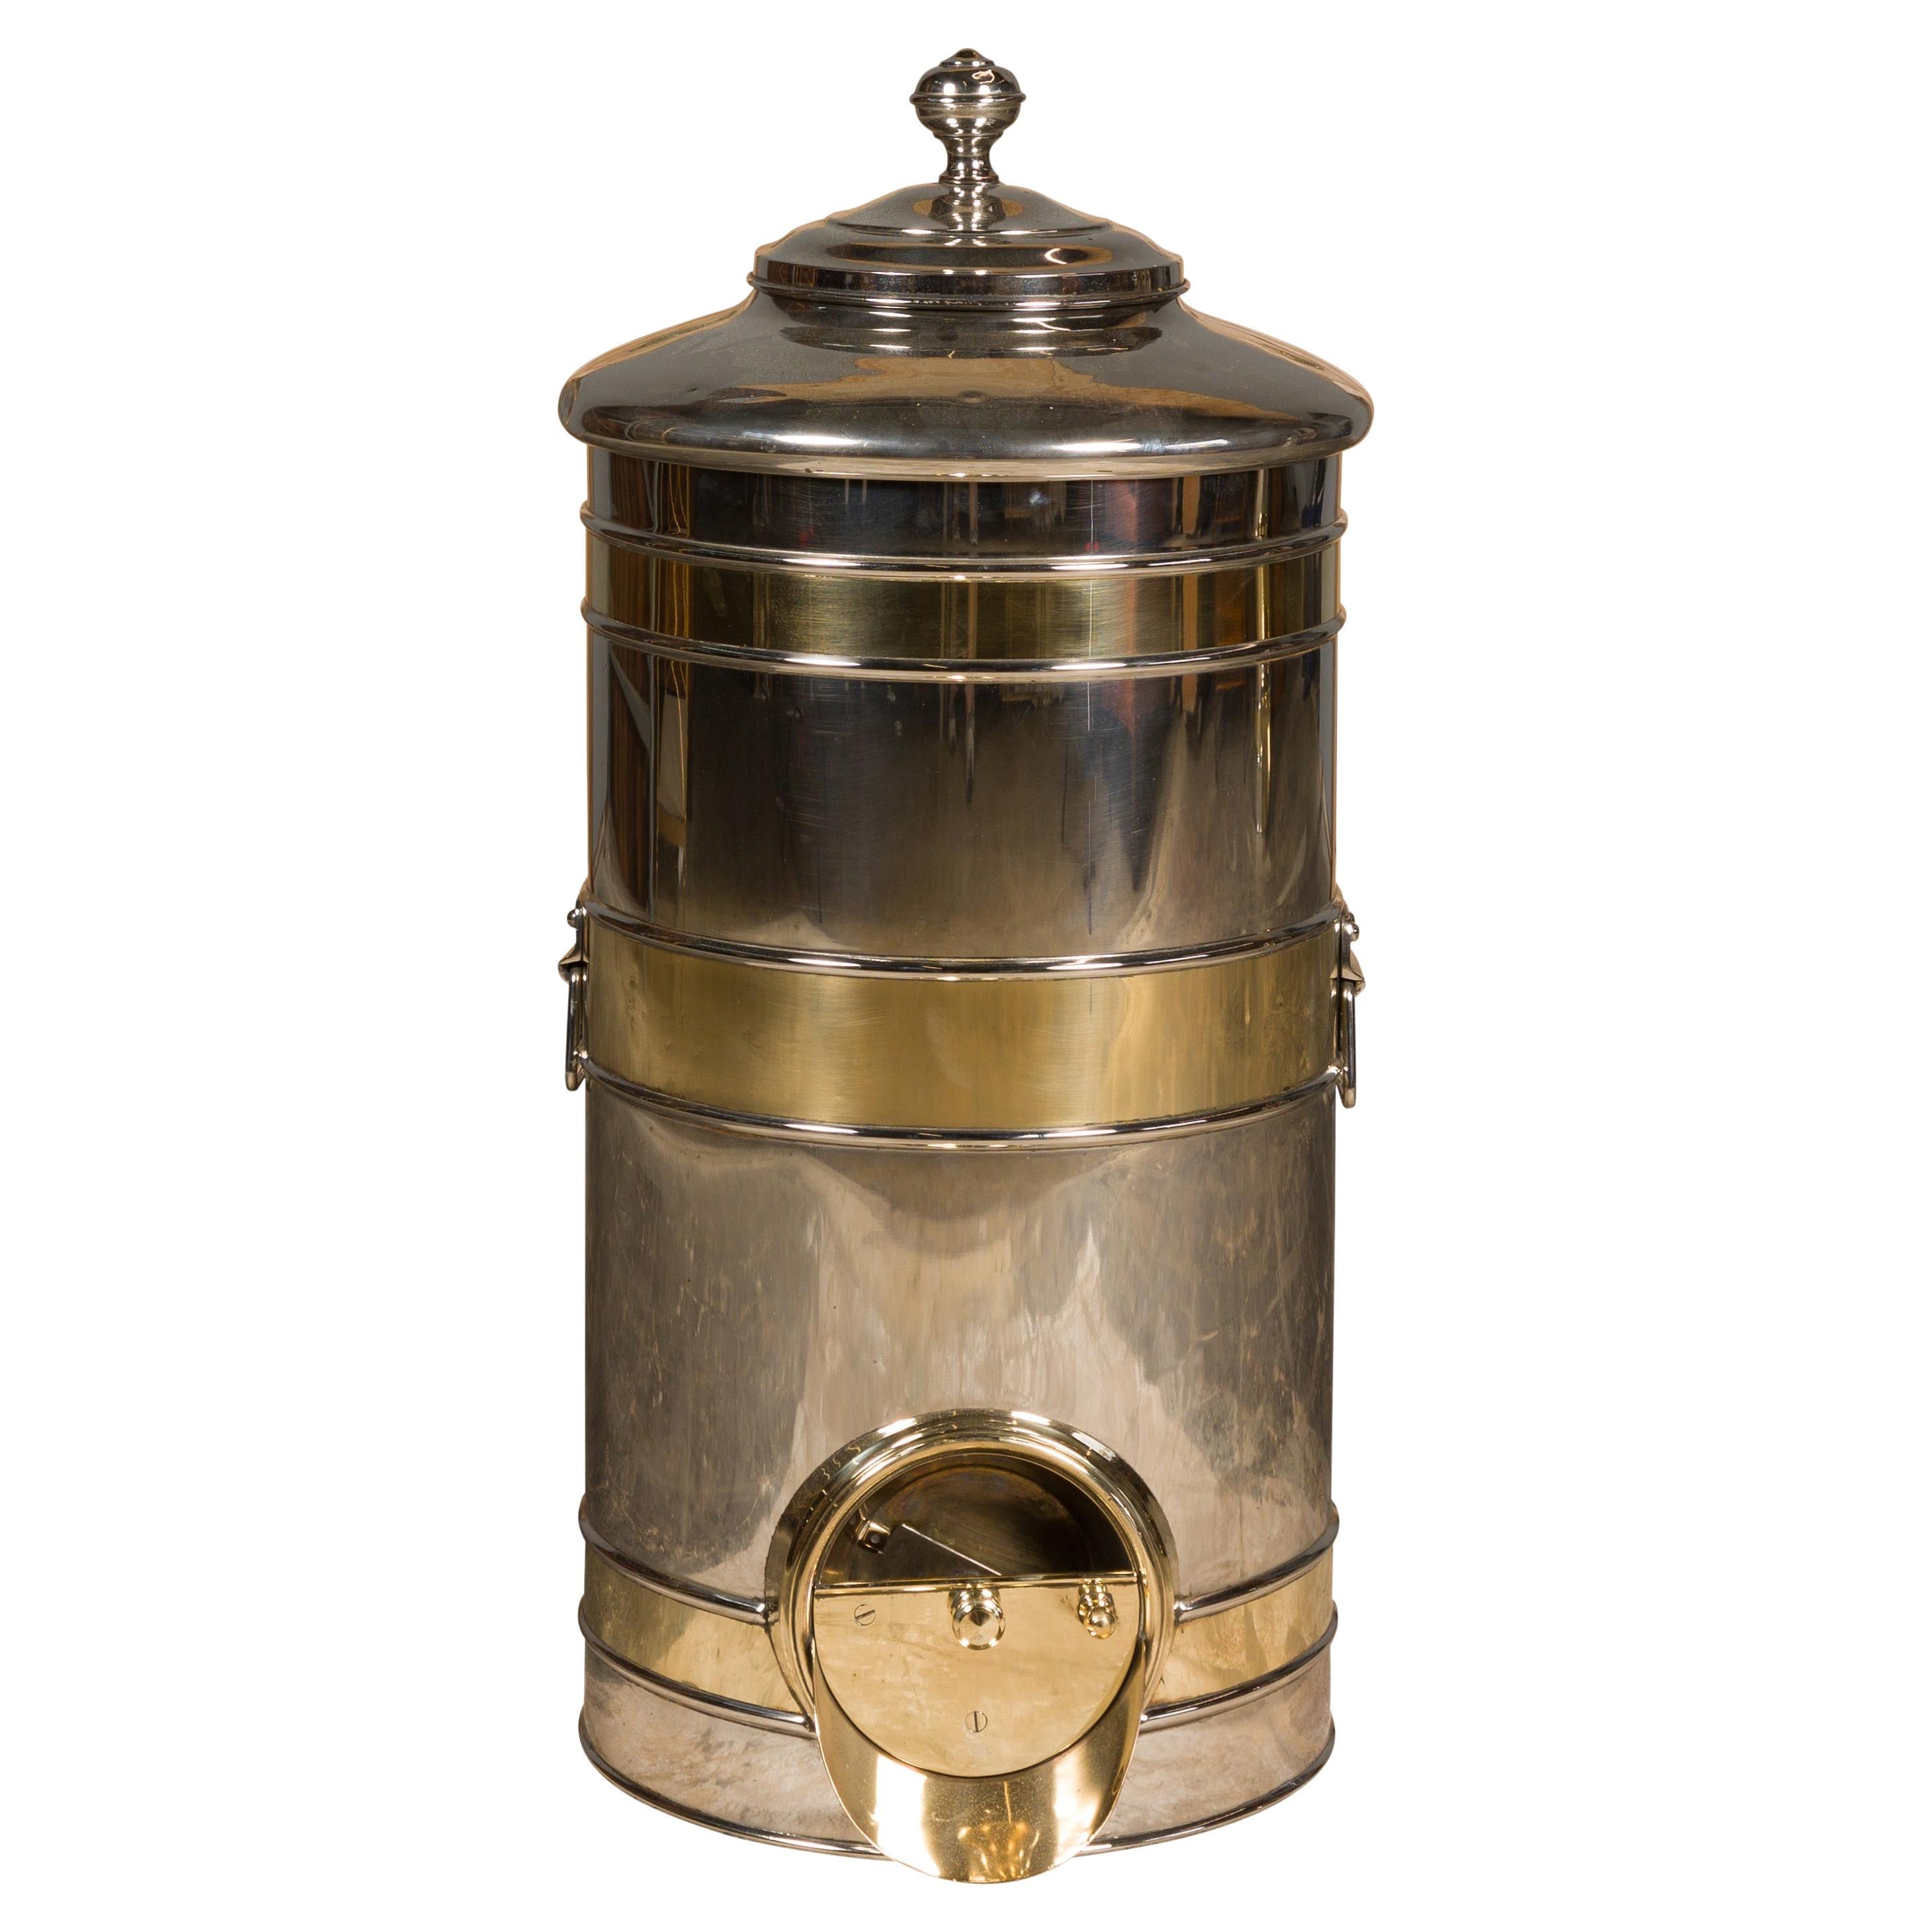 Turn of the Century French Steel and Brass Coffee Bean Dispenser, circa 1900